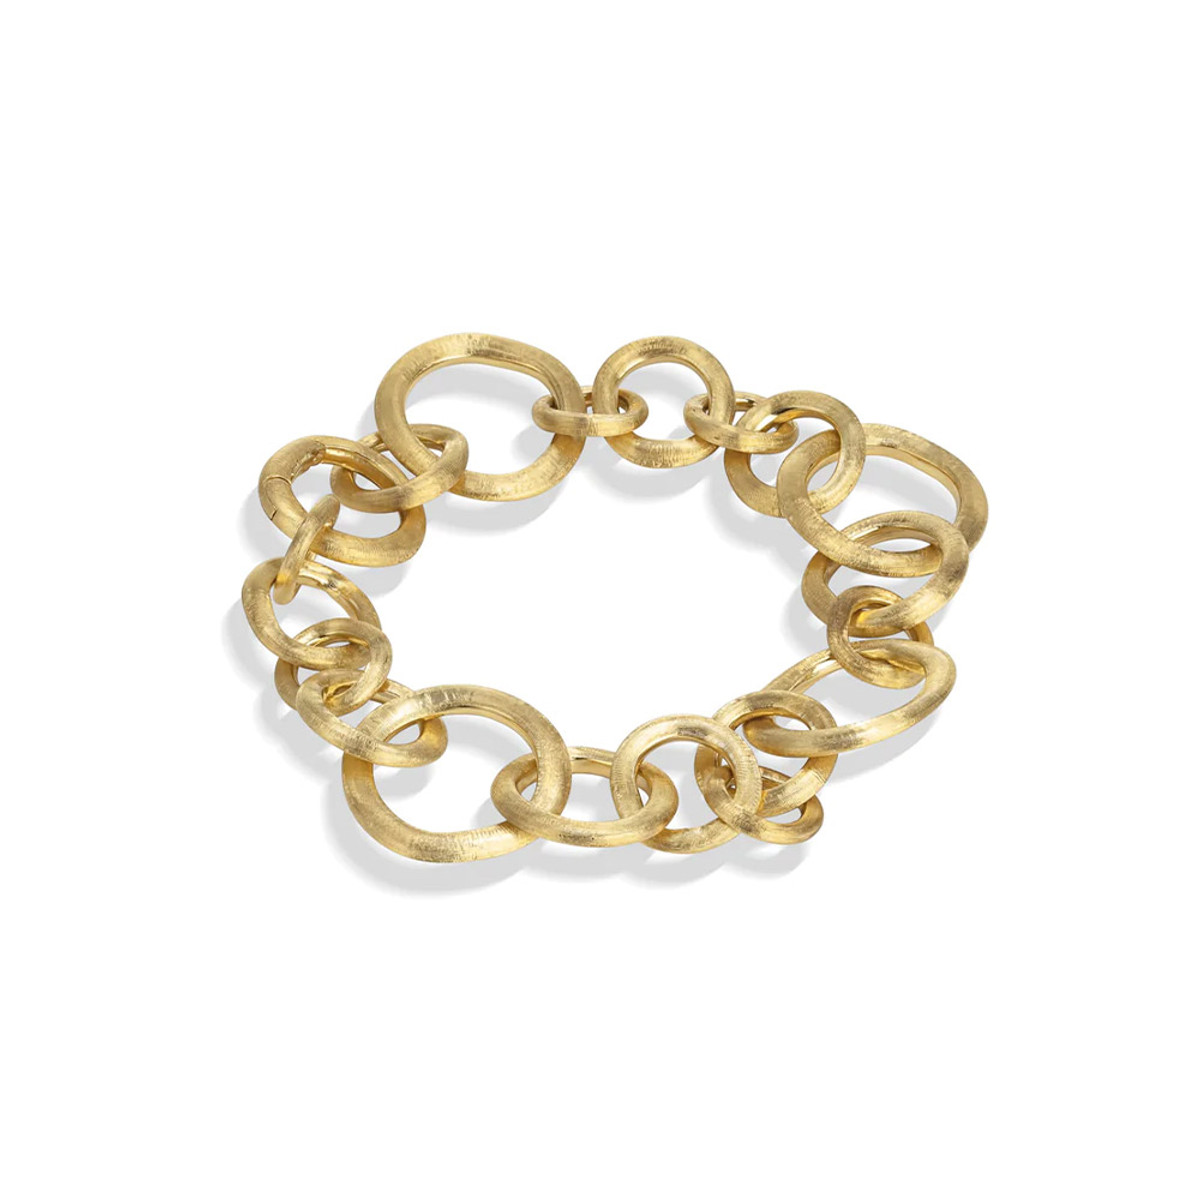 Marco Bicego Jaipur Collection 18K Yellow Gold Small Gauge Bracelet-47095